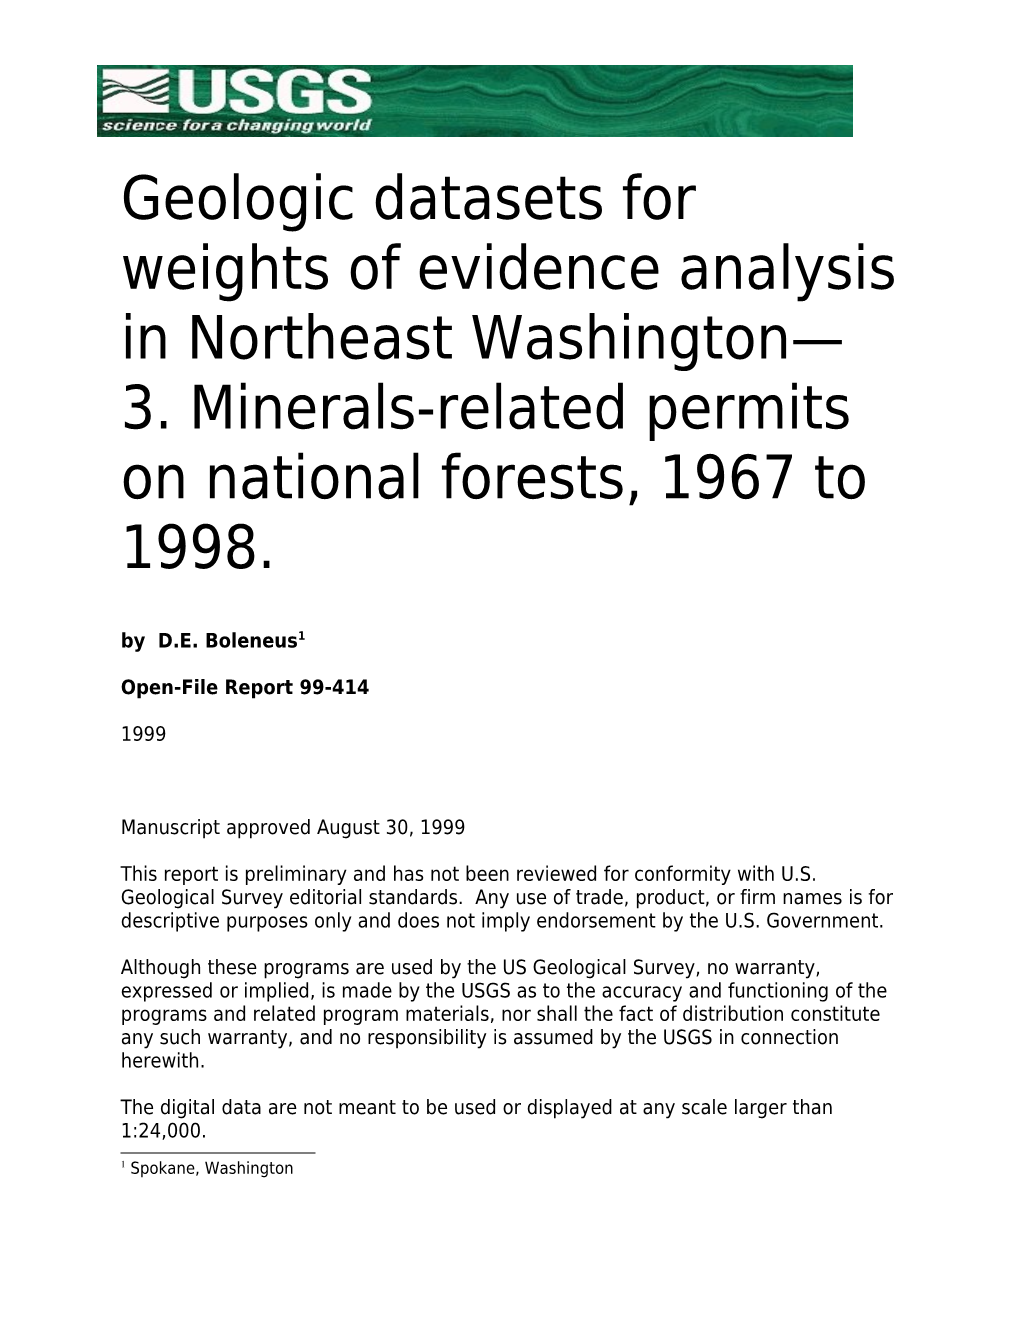 Geologic Datasets for Weights of Evidence Analysis in Northeast Washington